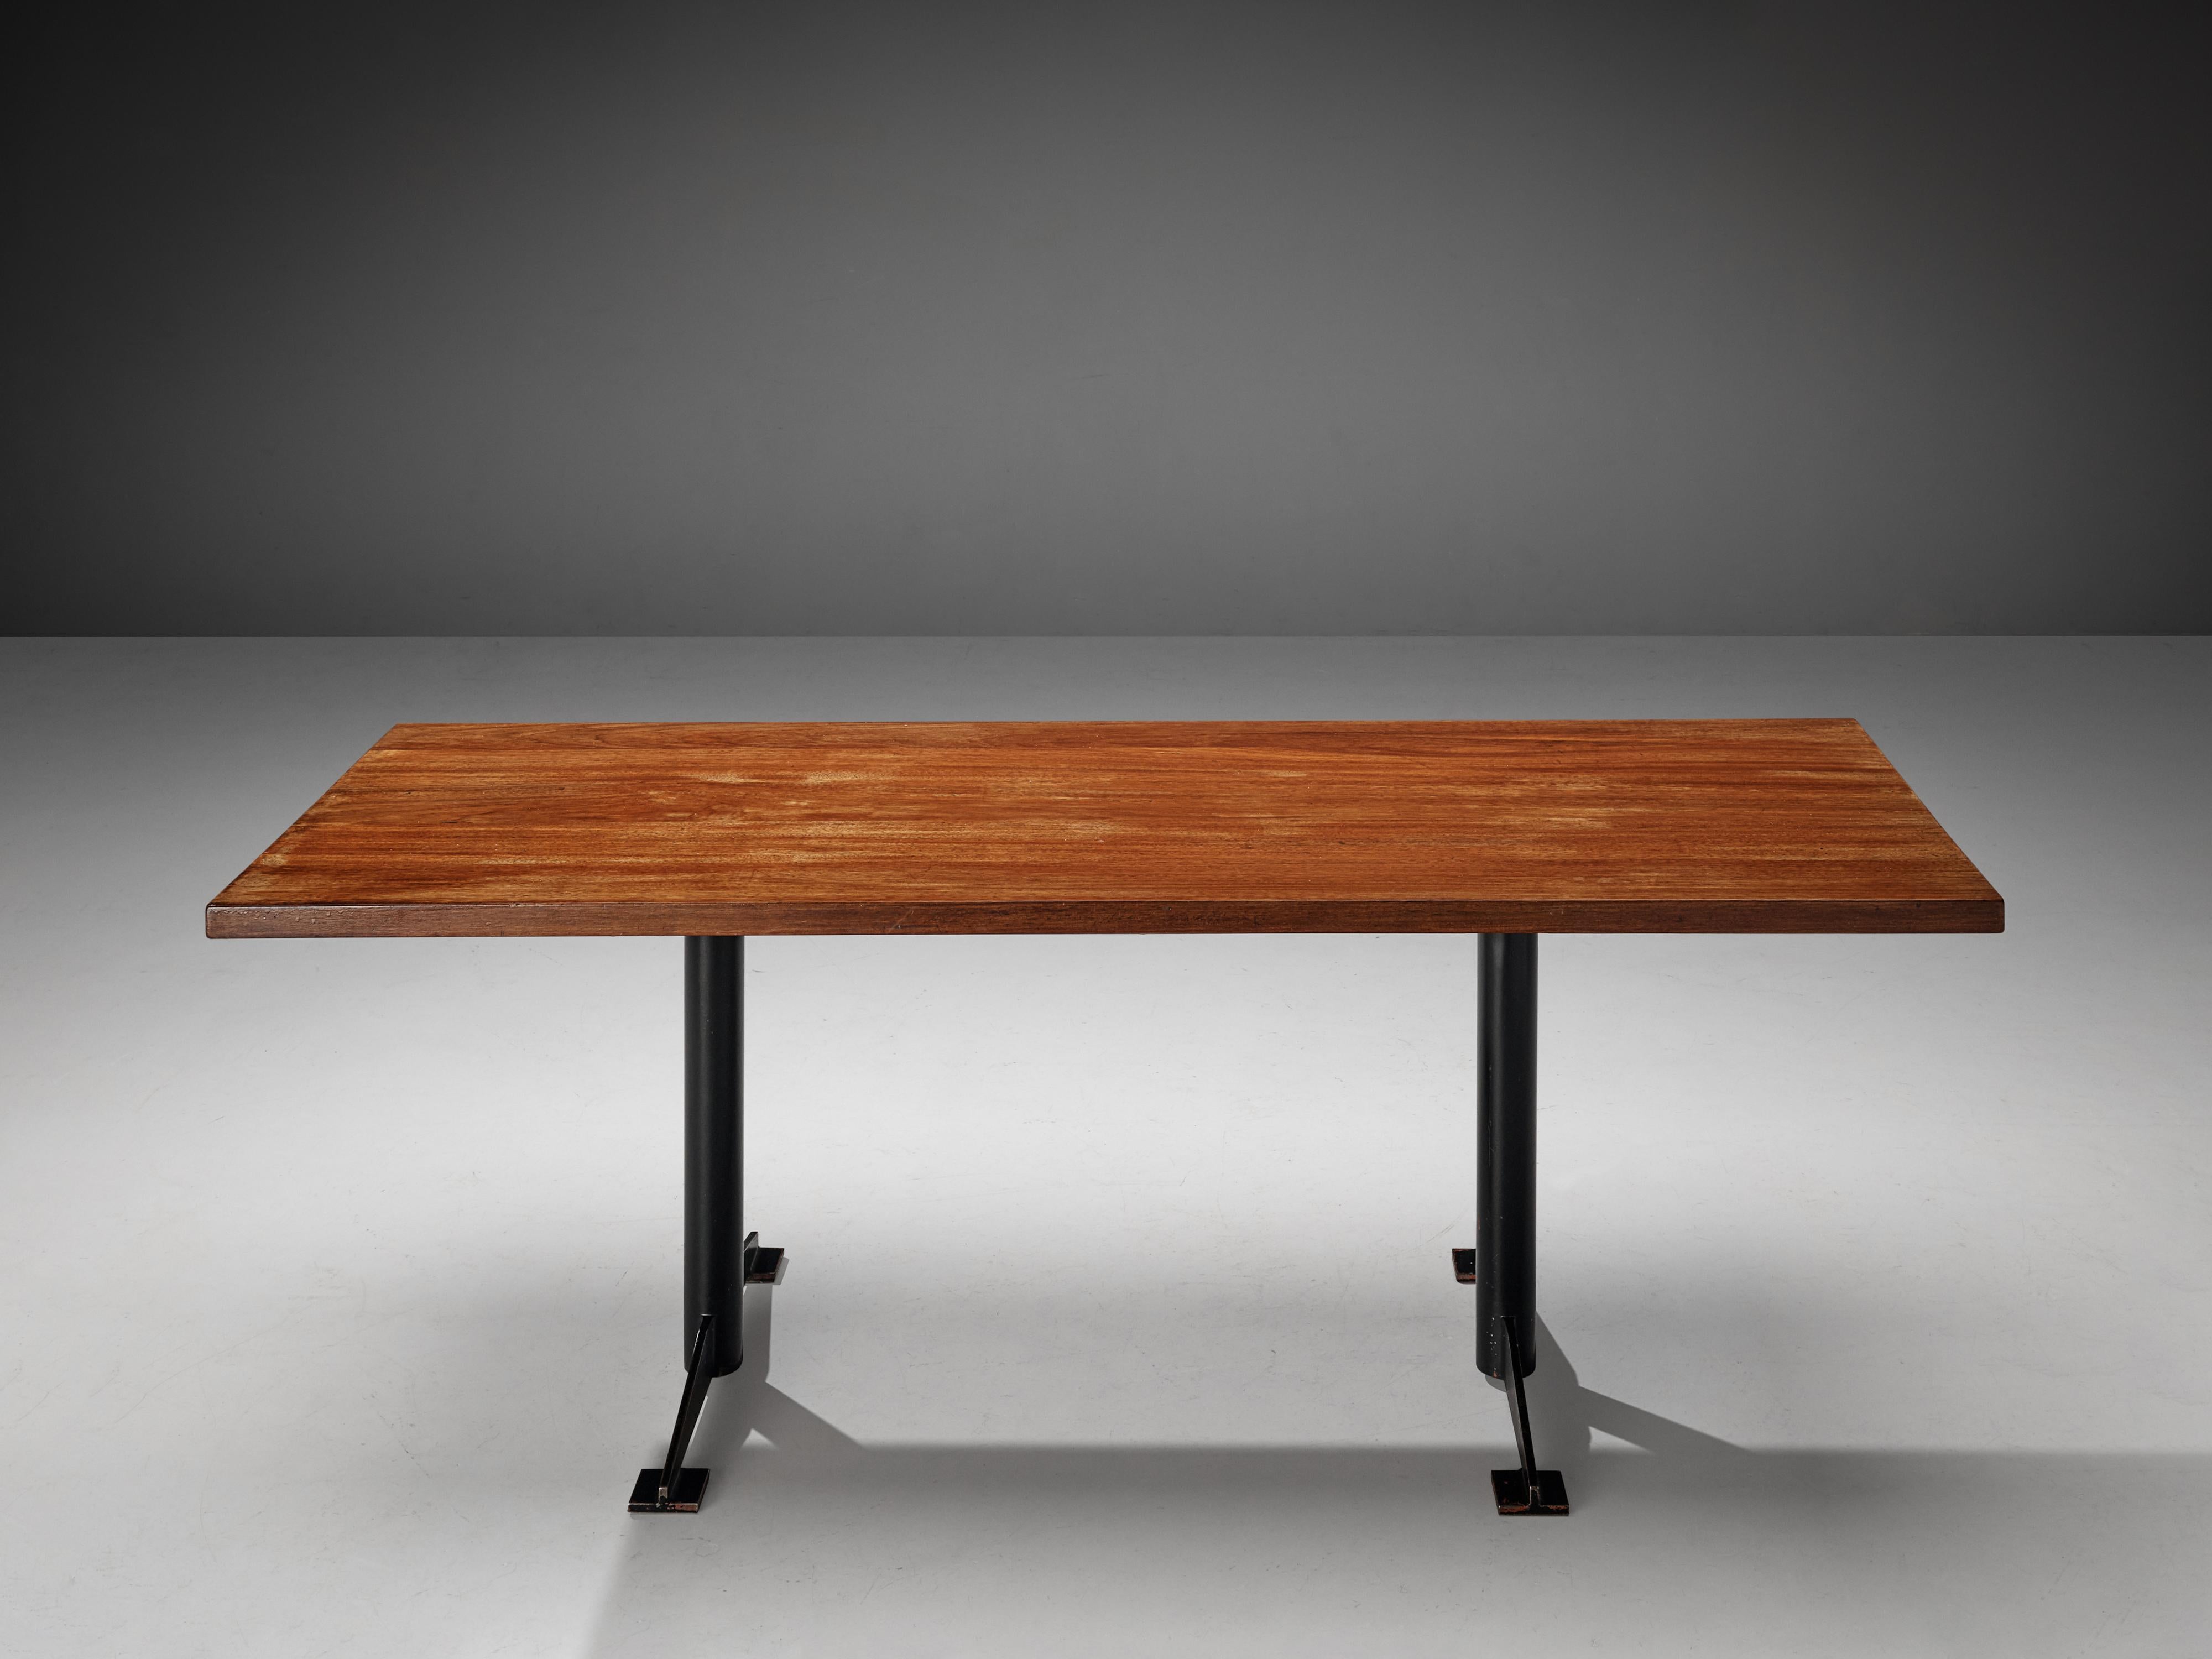 Wim den Boon, dining table, mahogany, lacquered metal, The Netherlands, designed in 1955 and manufactured in 1958. 

Exclusive dining table designed by Wim den Boon for a Dutch family home, and therefore one of a kind. This honest design features a